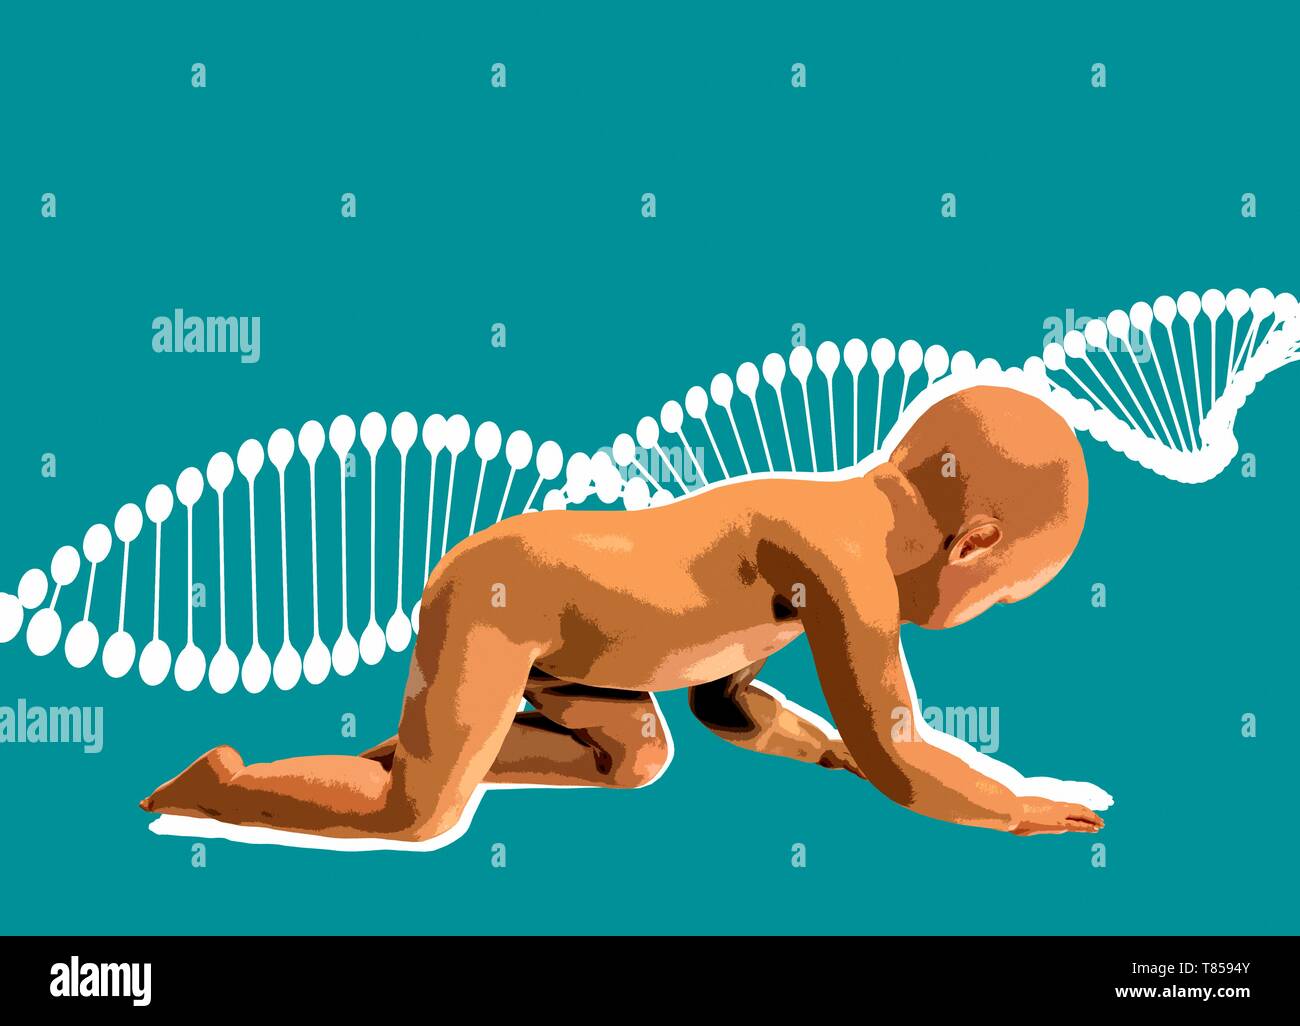 Baby and dna, illustration Stock Photo